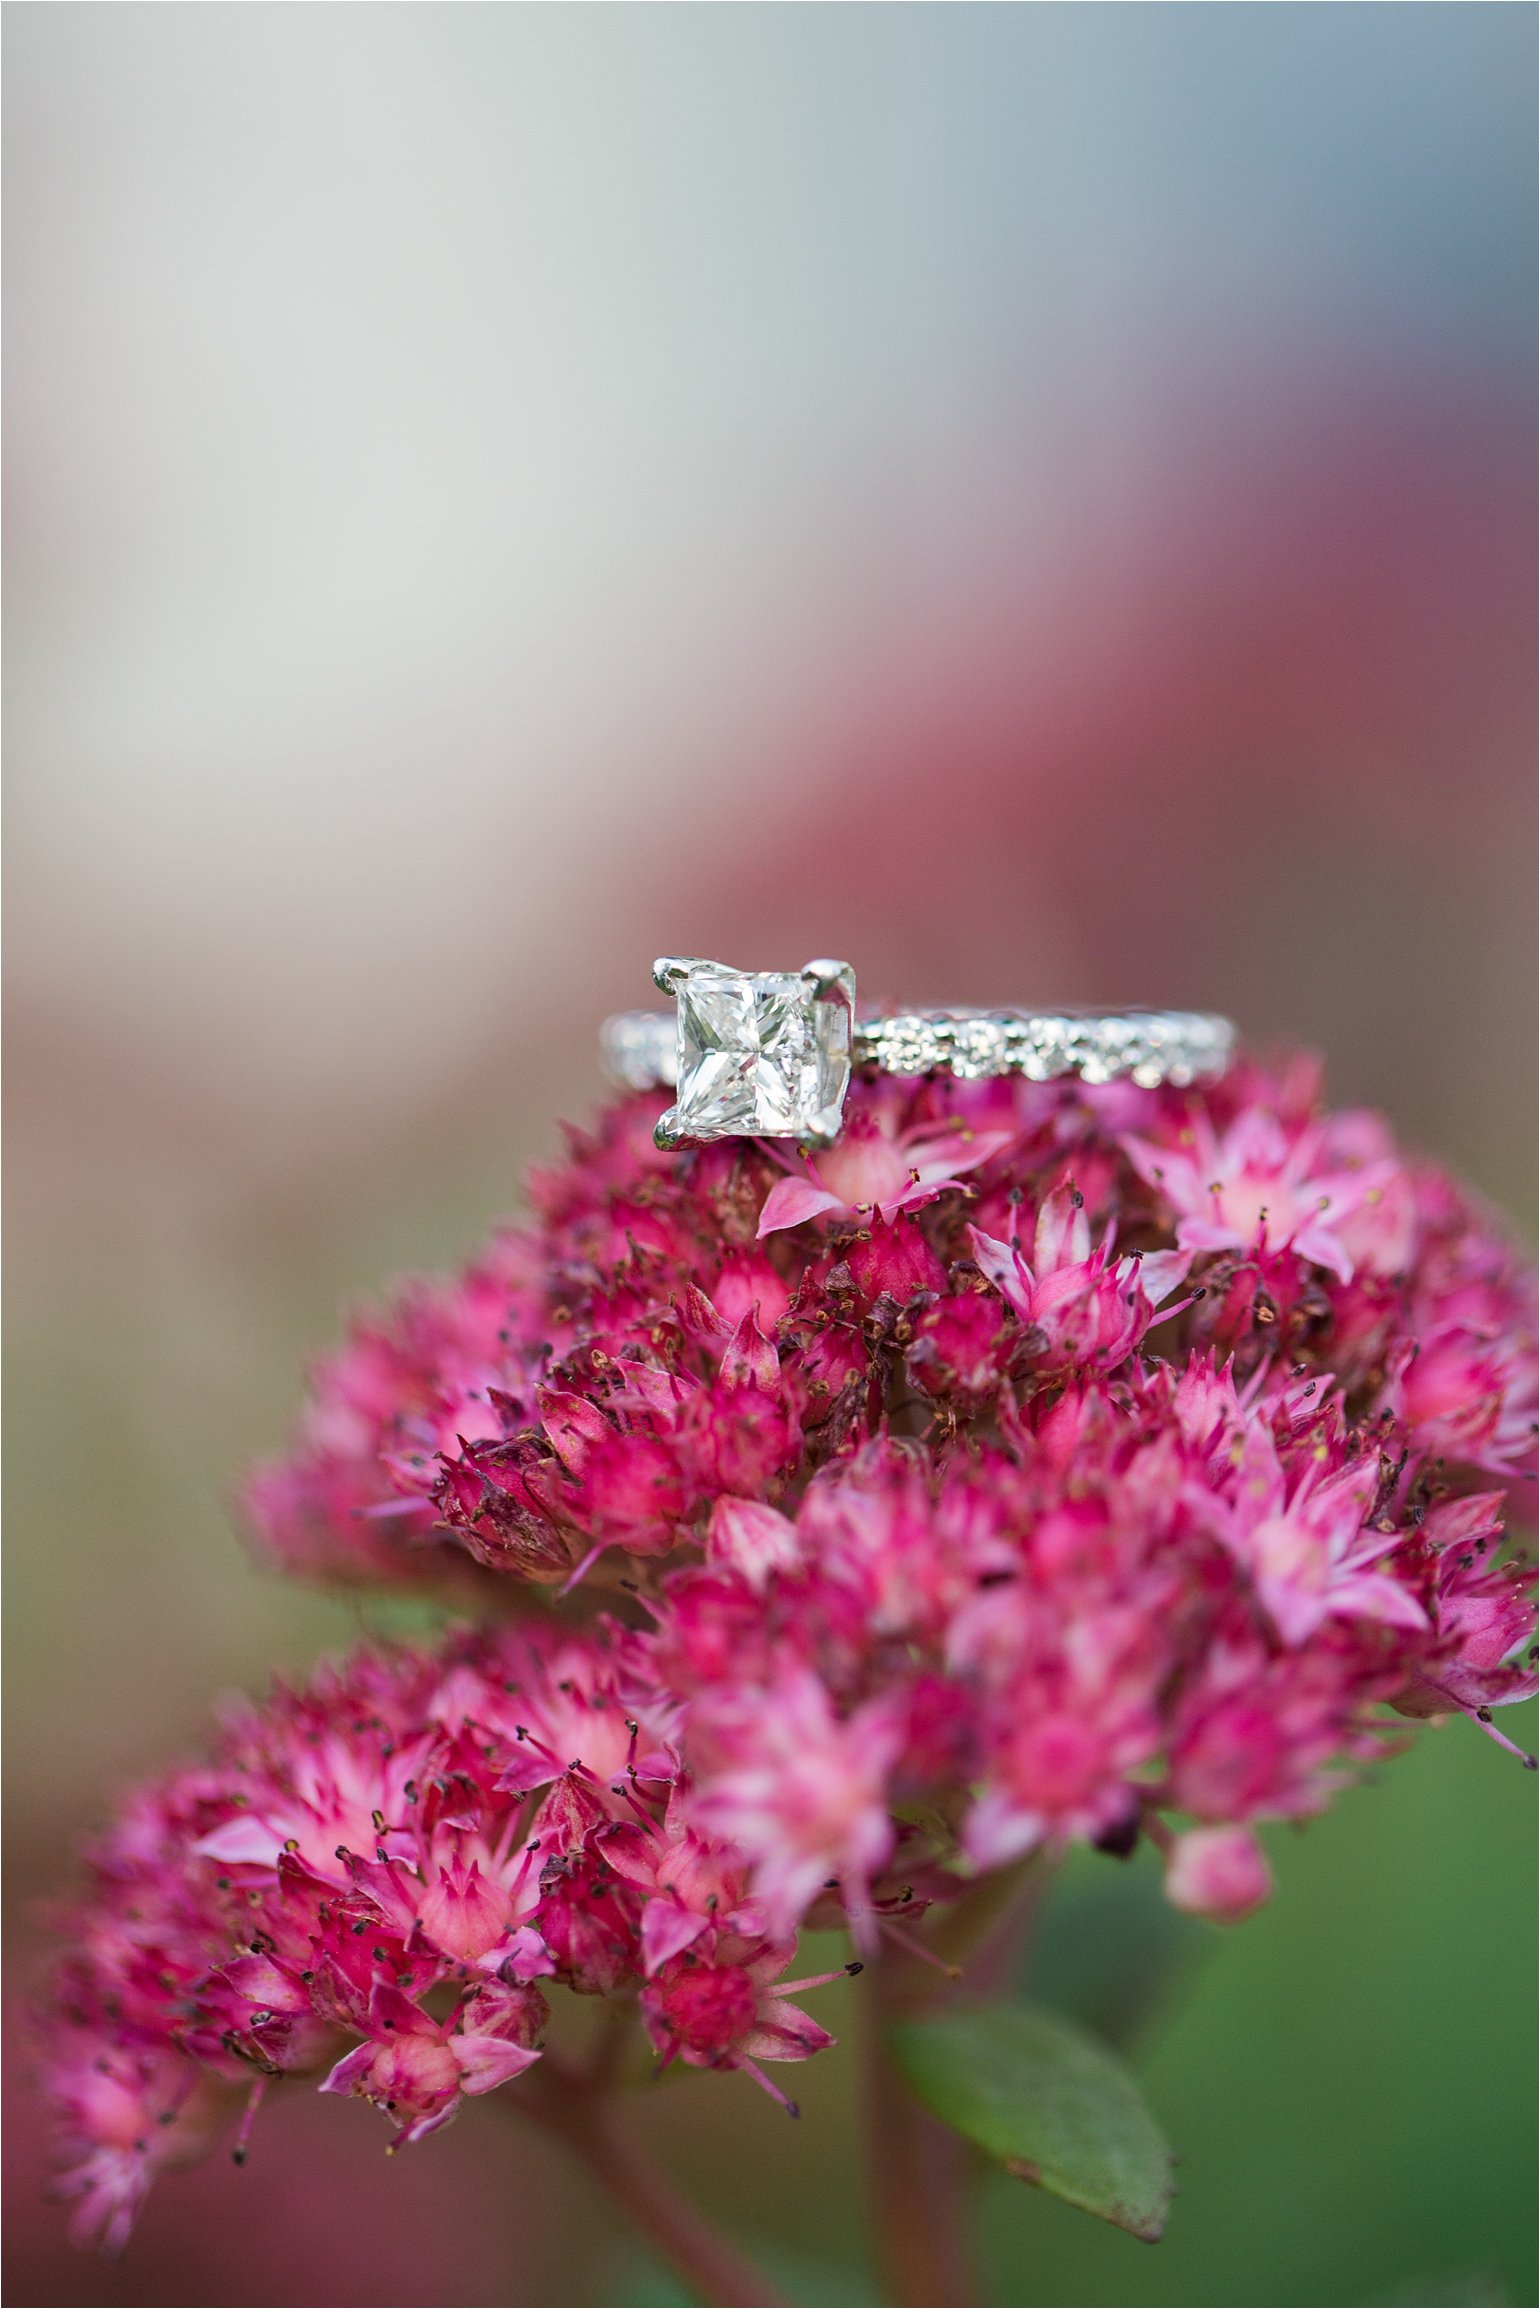 Engagement ring on flowers © 2015 Maundy Mitchell